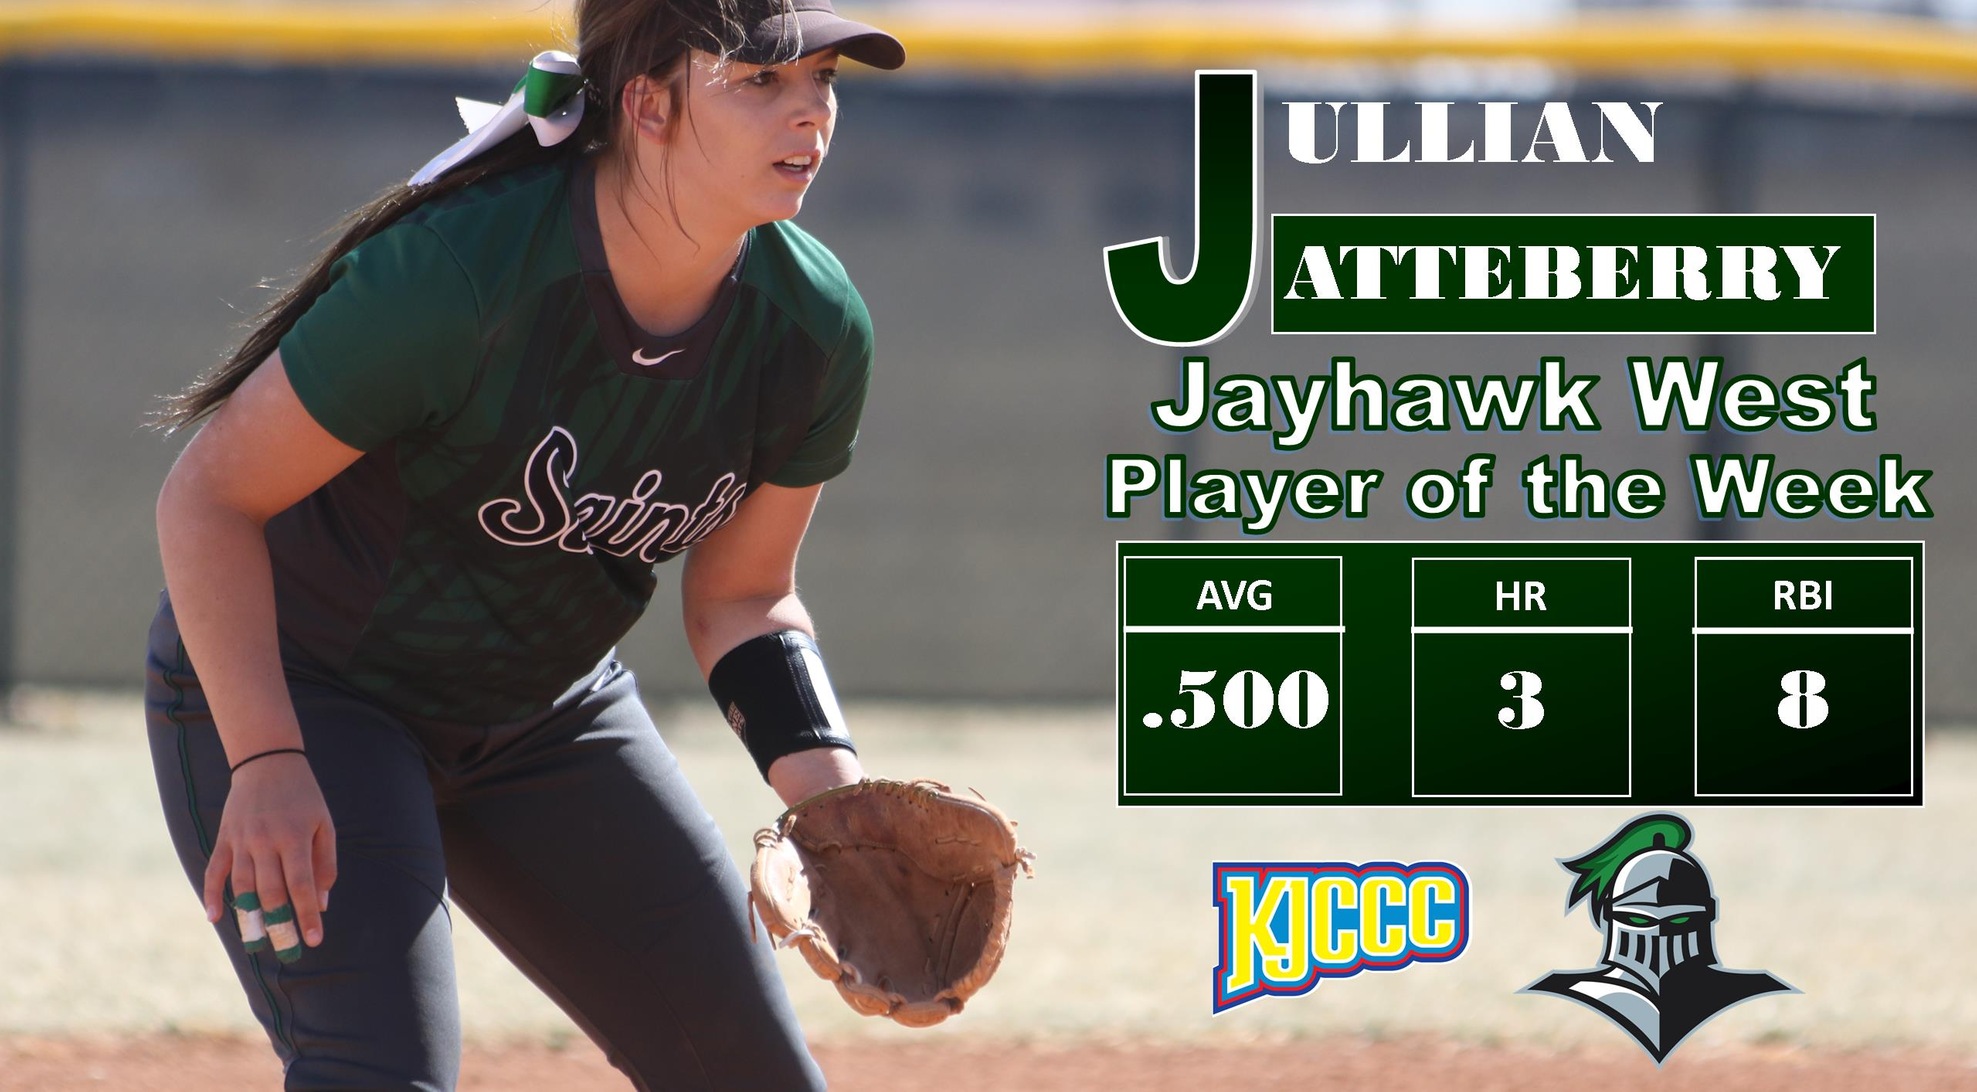 Atteberry named Jayhawk Player of the Week